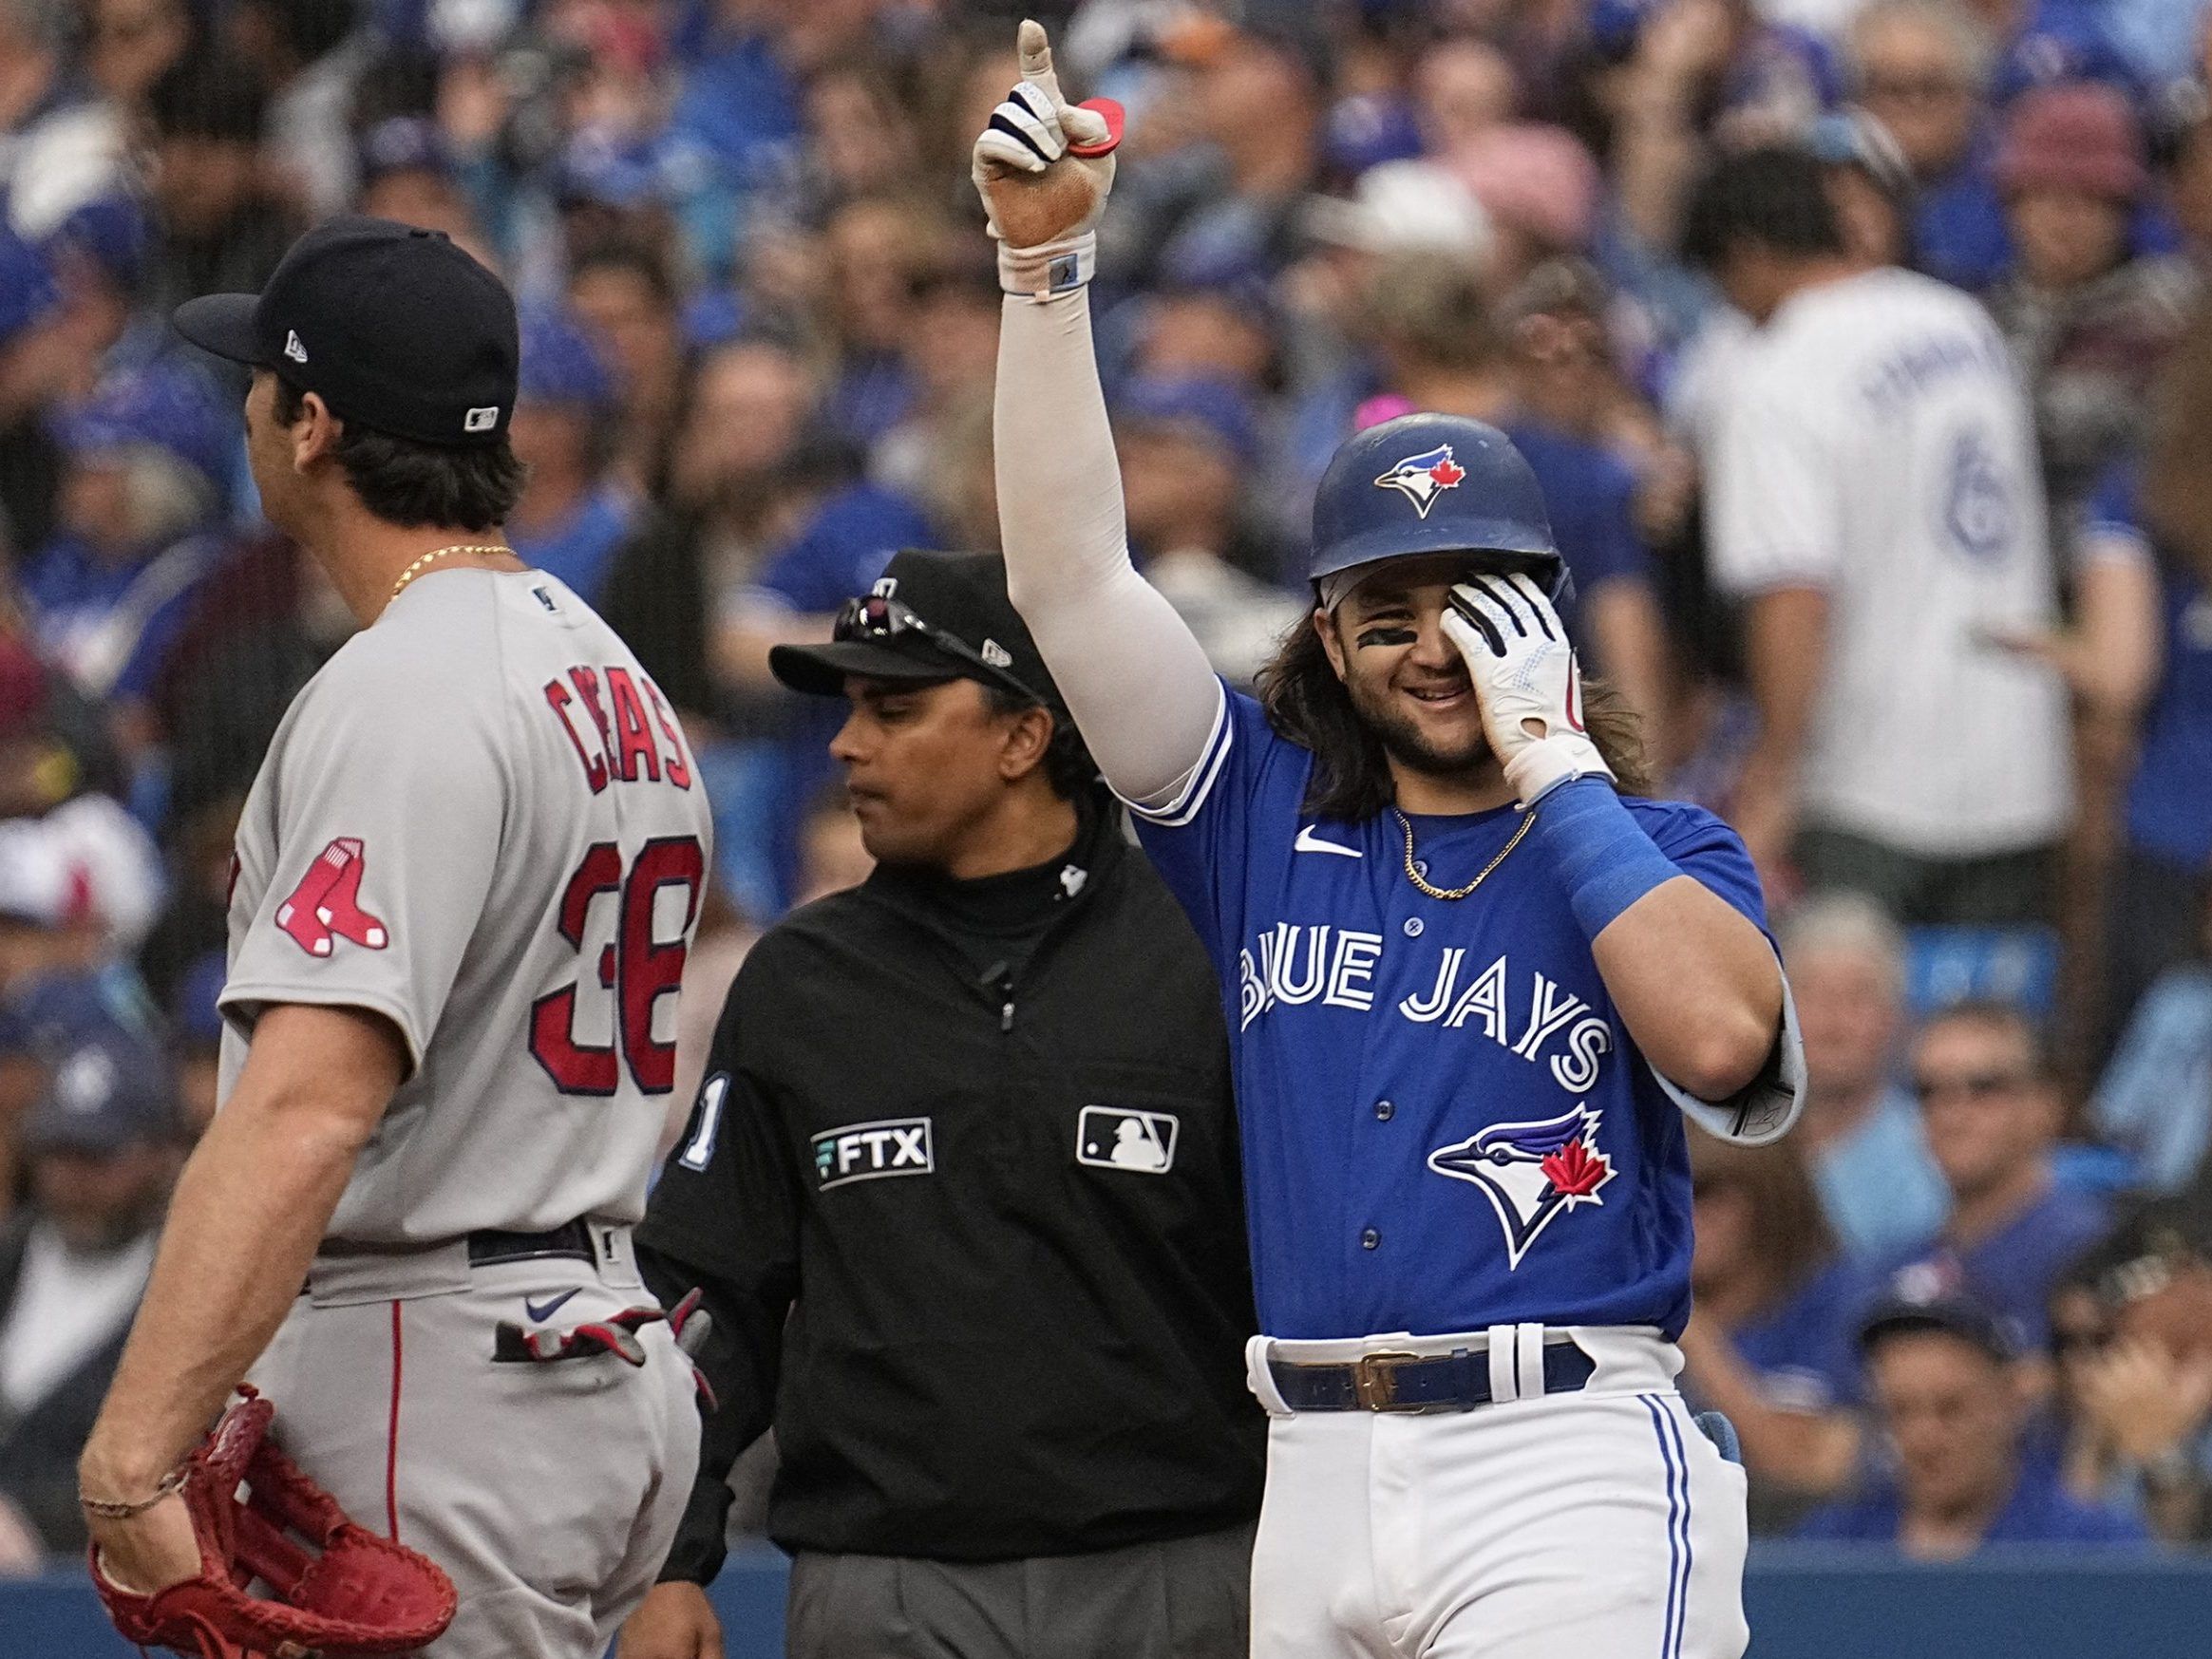 Playoff-bound Jays ready to create iconic Toronto sporting moment